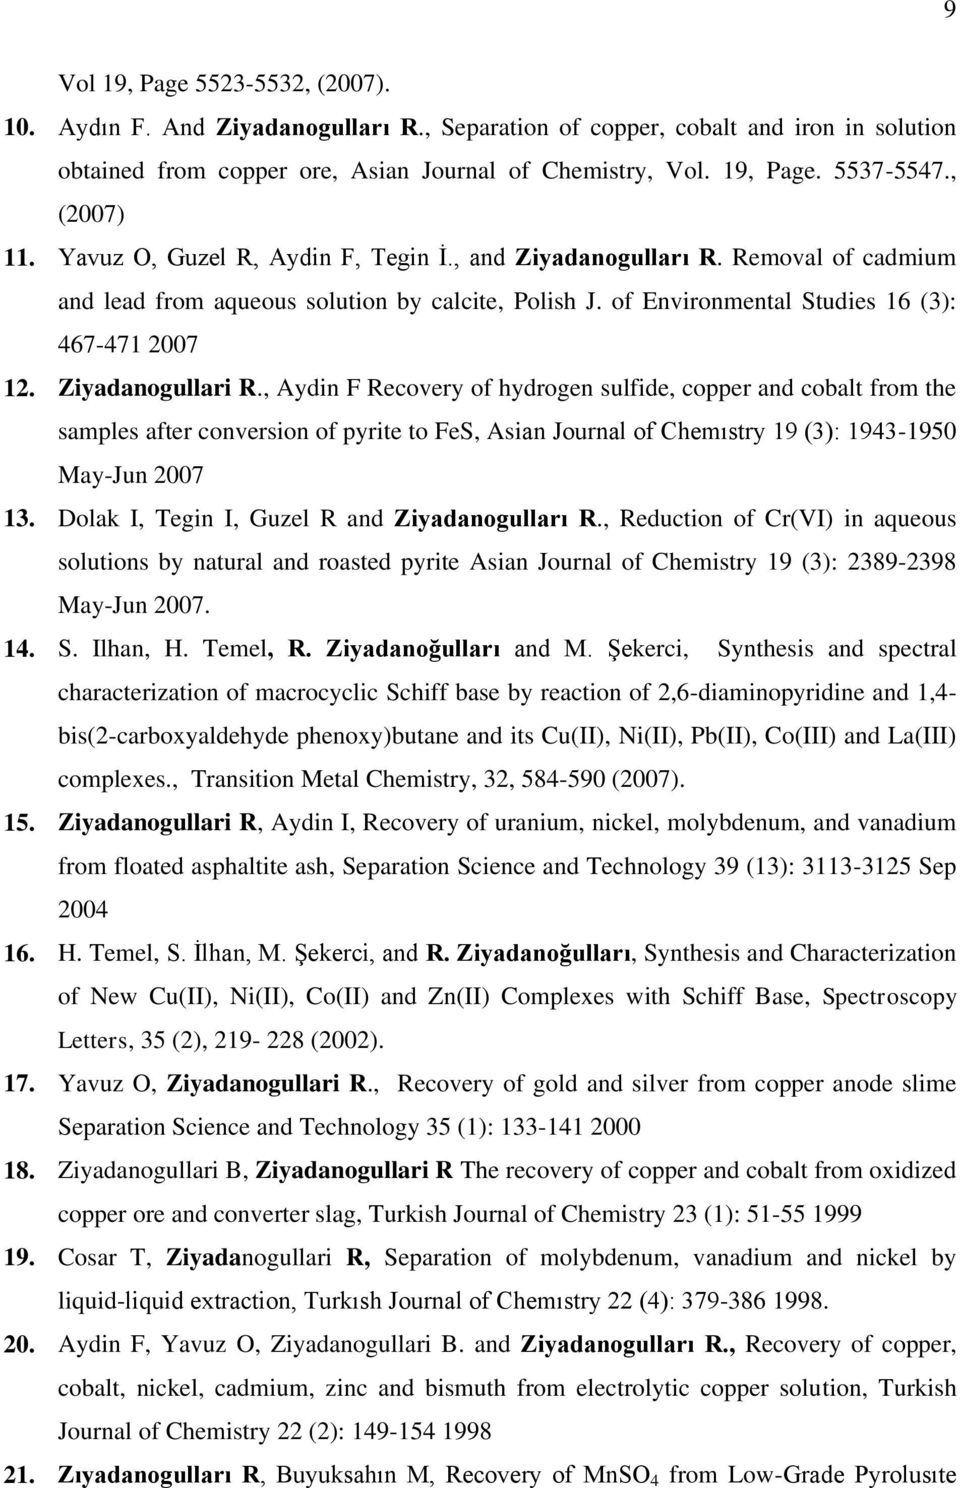 Ziyadanogullari R., Aydin F Recovery of hydrogen sulfide, copper and cobalt from the samples after conversion of pyrite to FeS, Asian Journal of Chemıstry 19 (3): 1943-1950 May-Jun 2007 13.